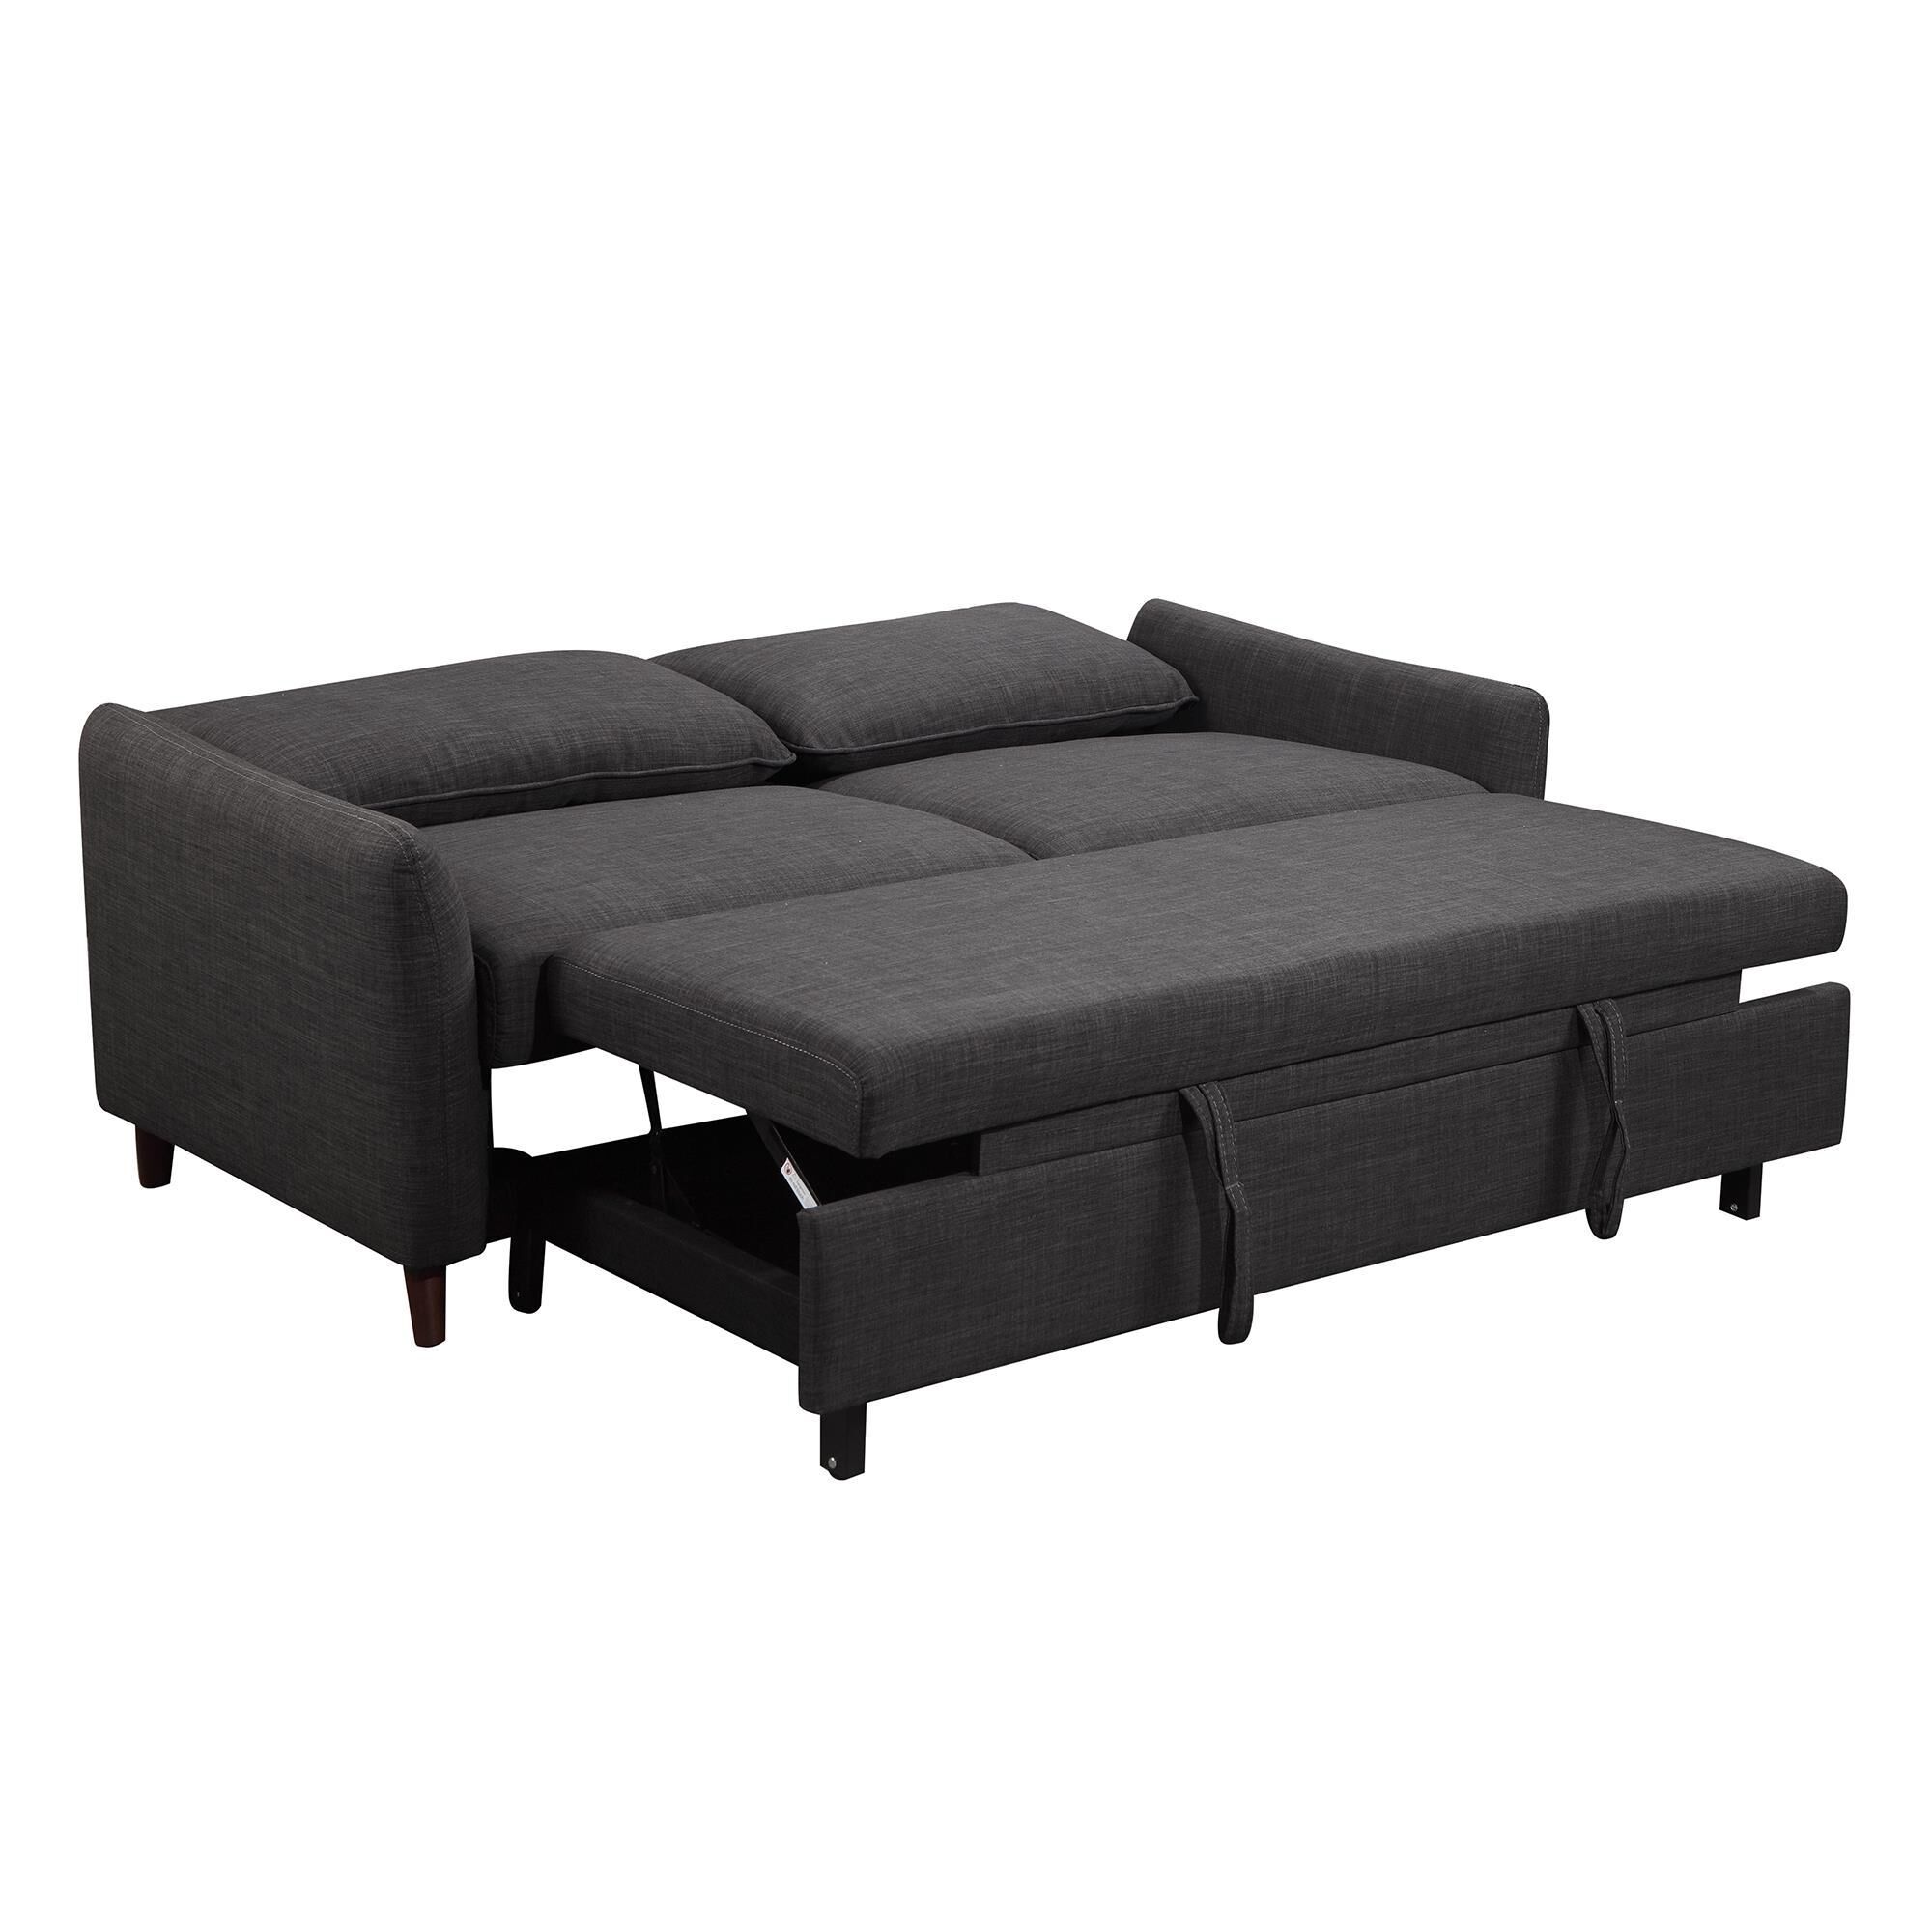 Amalfi Home Furniture Holden Layflat Sofa with Pull Out Sleeper in